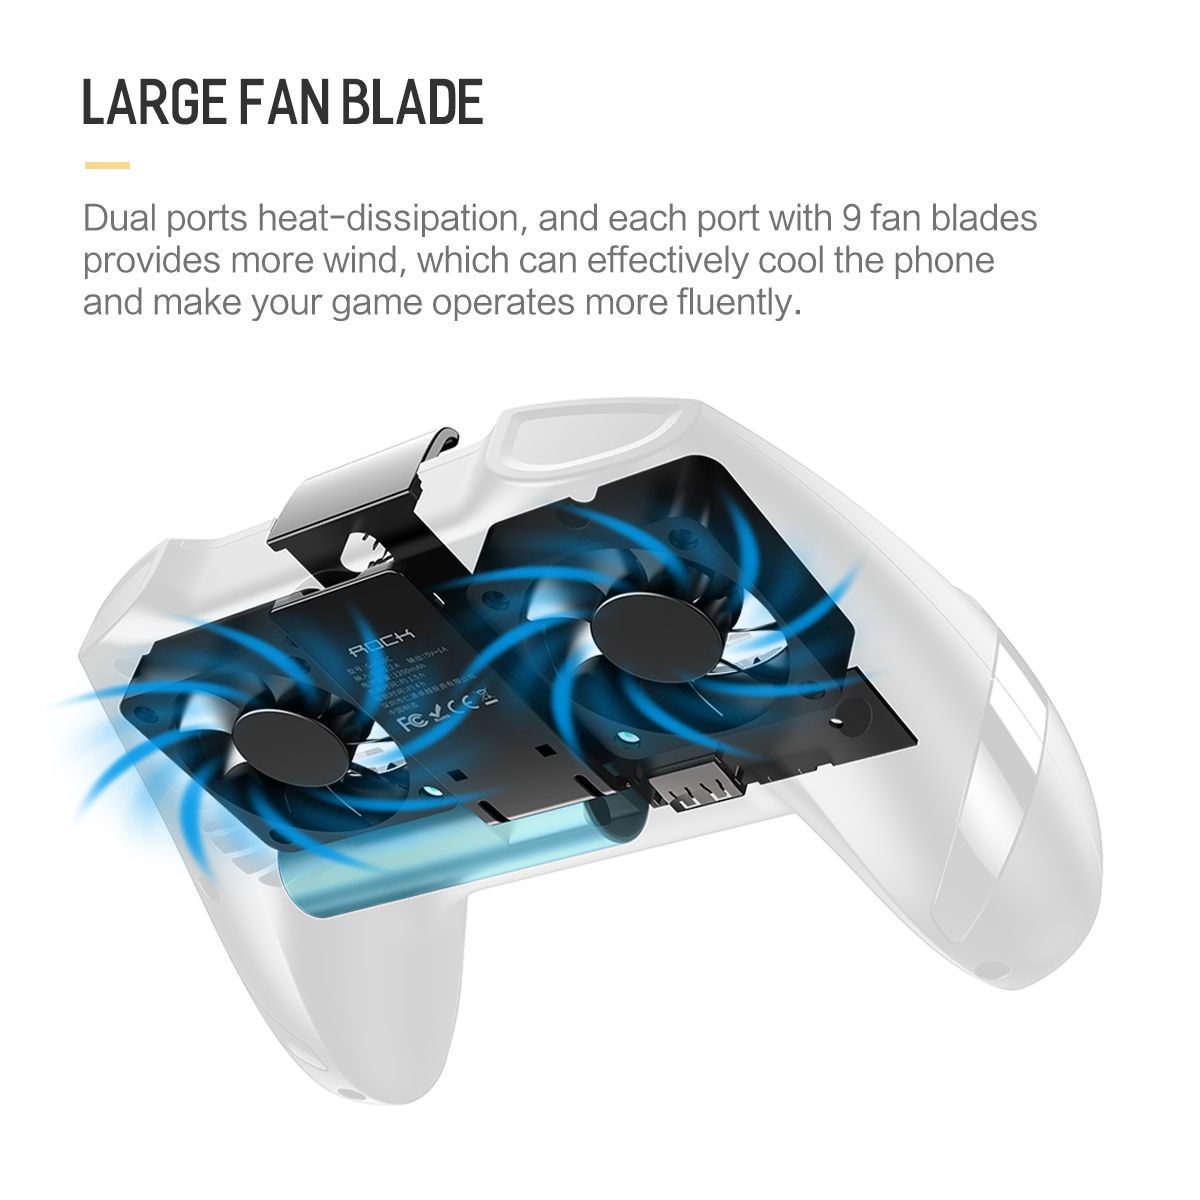 ROCK-Gamepad-Controller-Phone-Holder-Double-Cooling-Fan-With-Power-Bank-For-4-67-inch-Phones-1335284